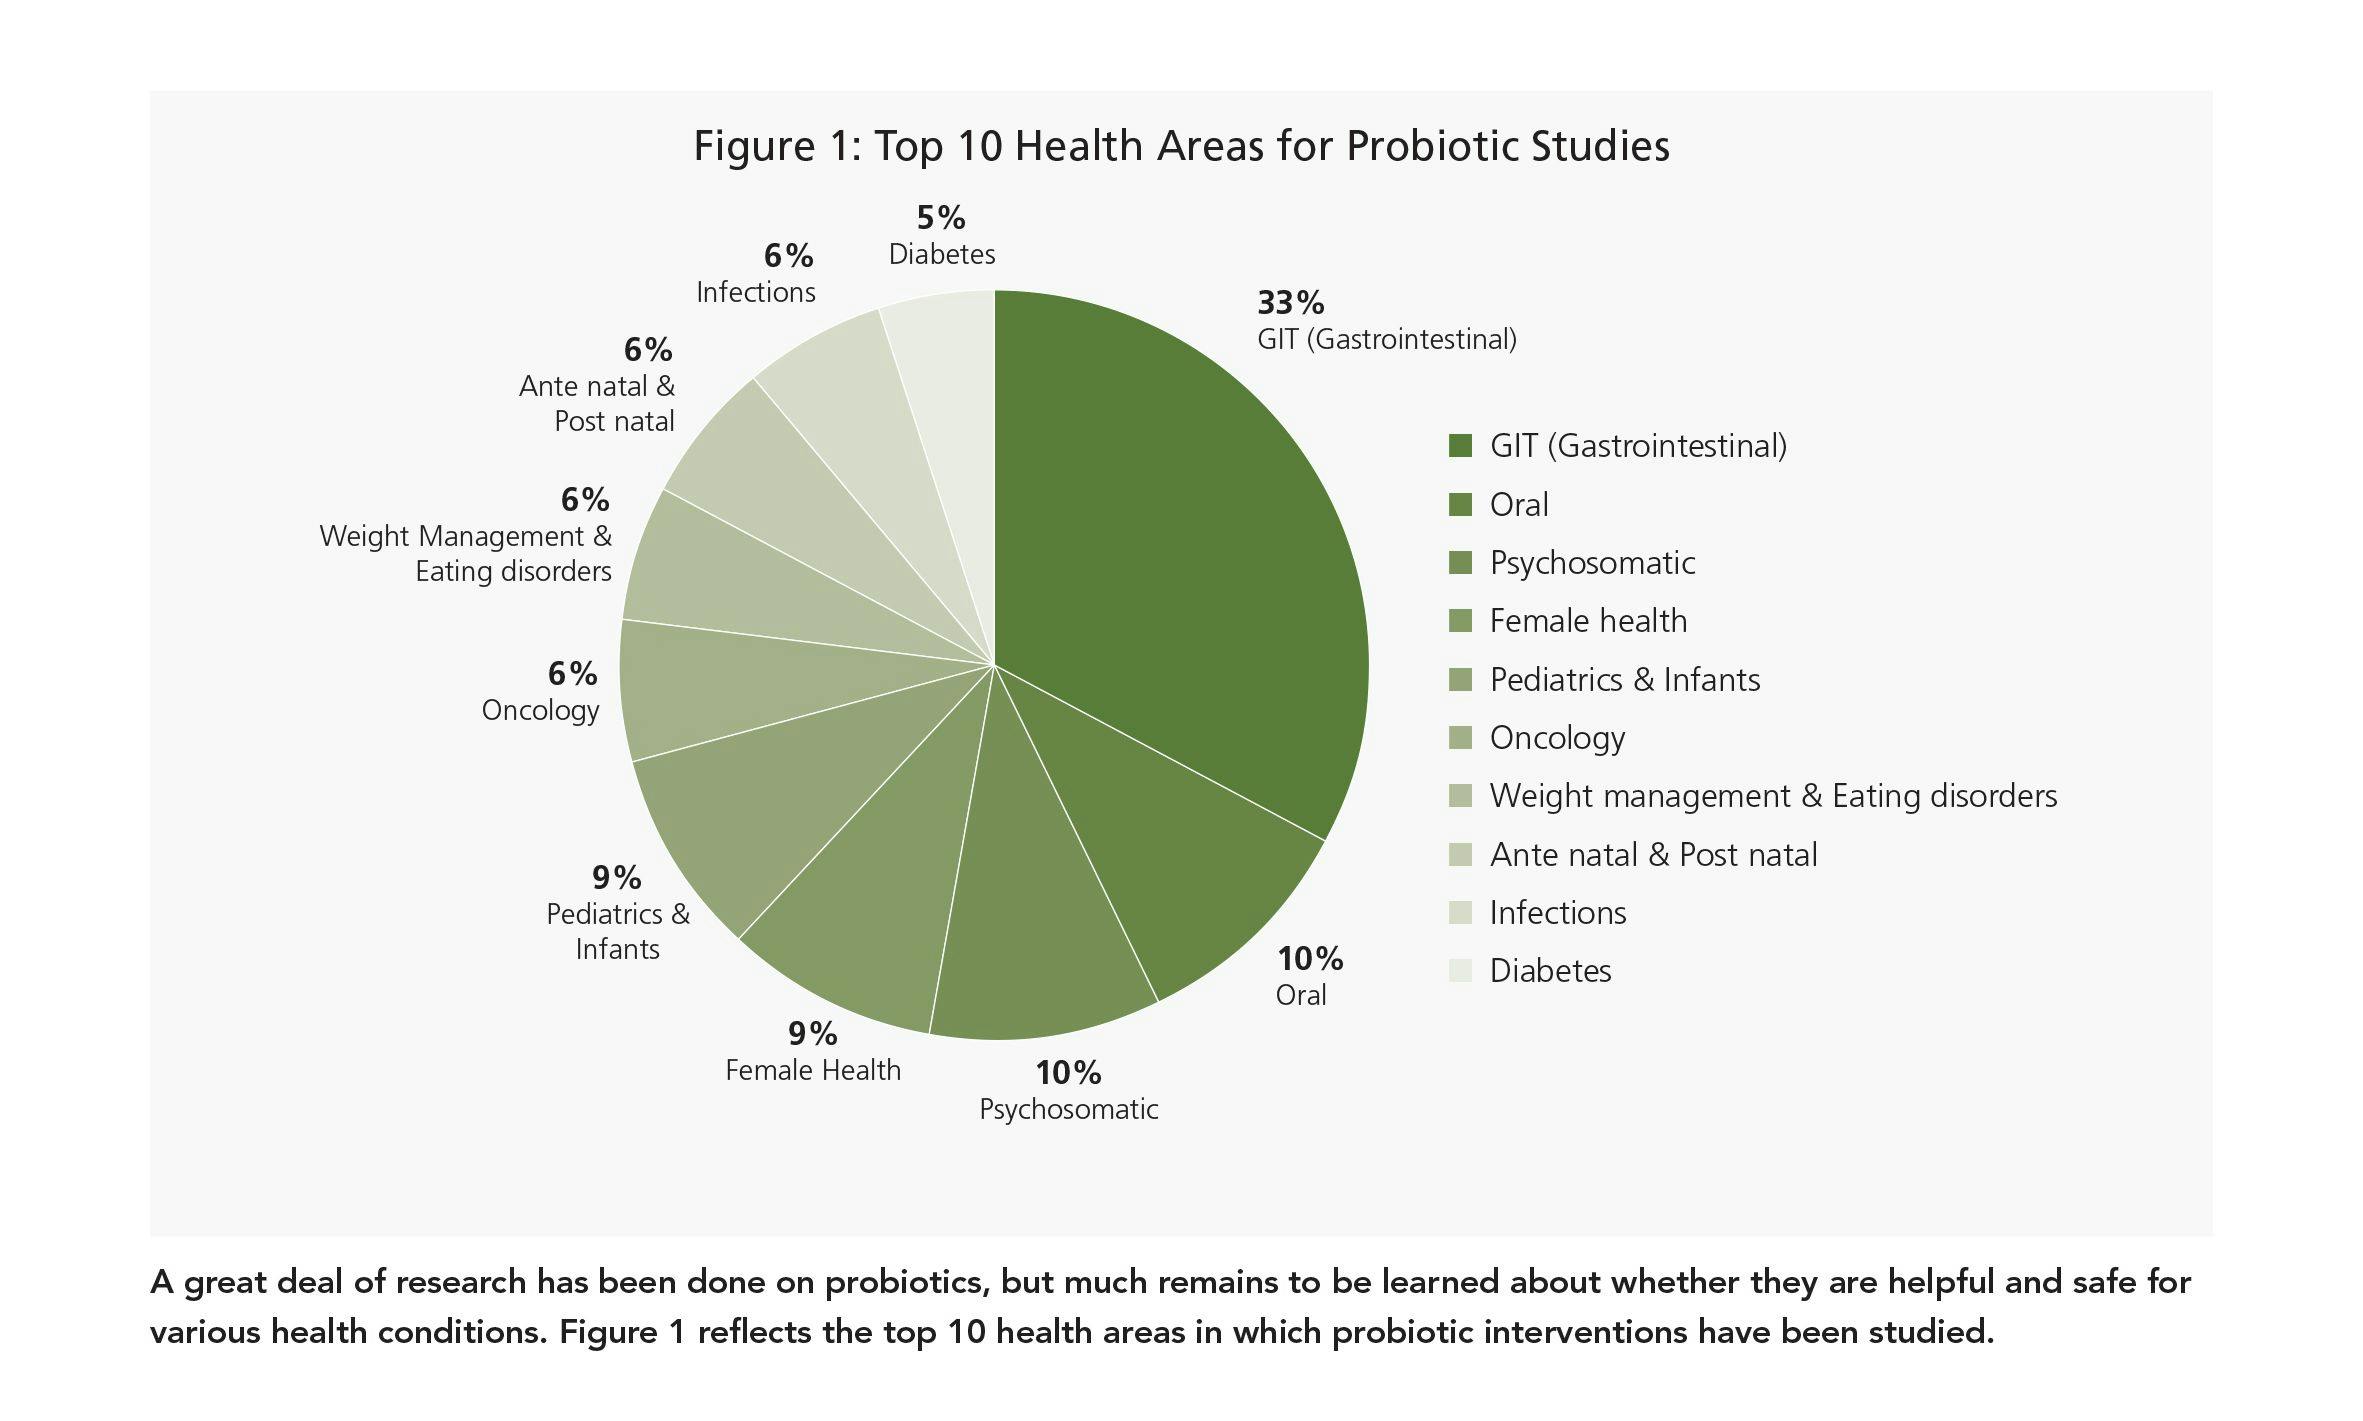 A great deal of research has been done on probiotics, but much remains to be learned about whether they are helpful and safe for various health conditions. Figure 1 reflects the top 10 health areas in which probiotic interventions have been studied.